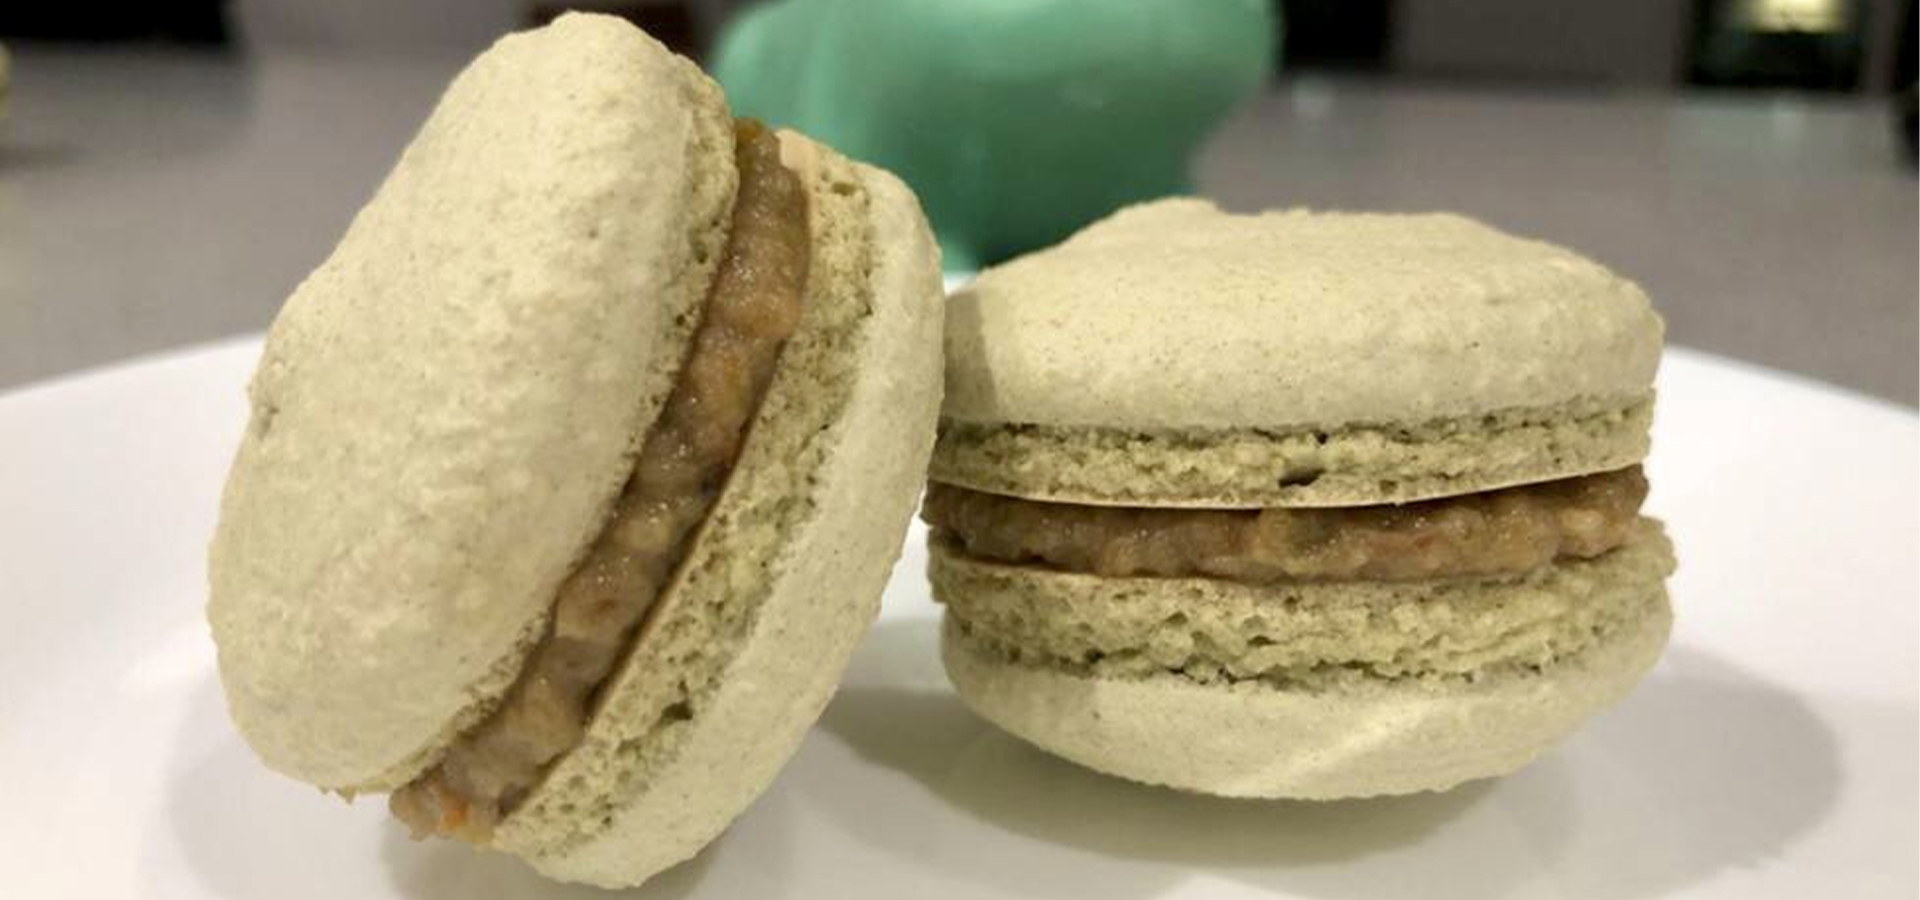 The vegan pistachio French macaron created by Jaqueline Thach